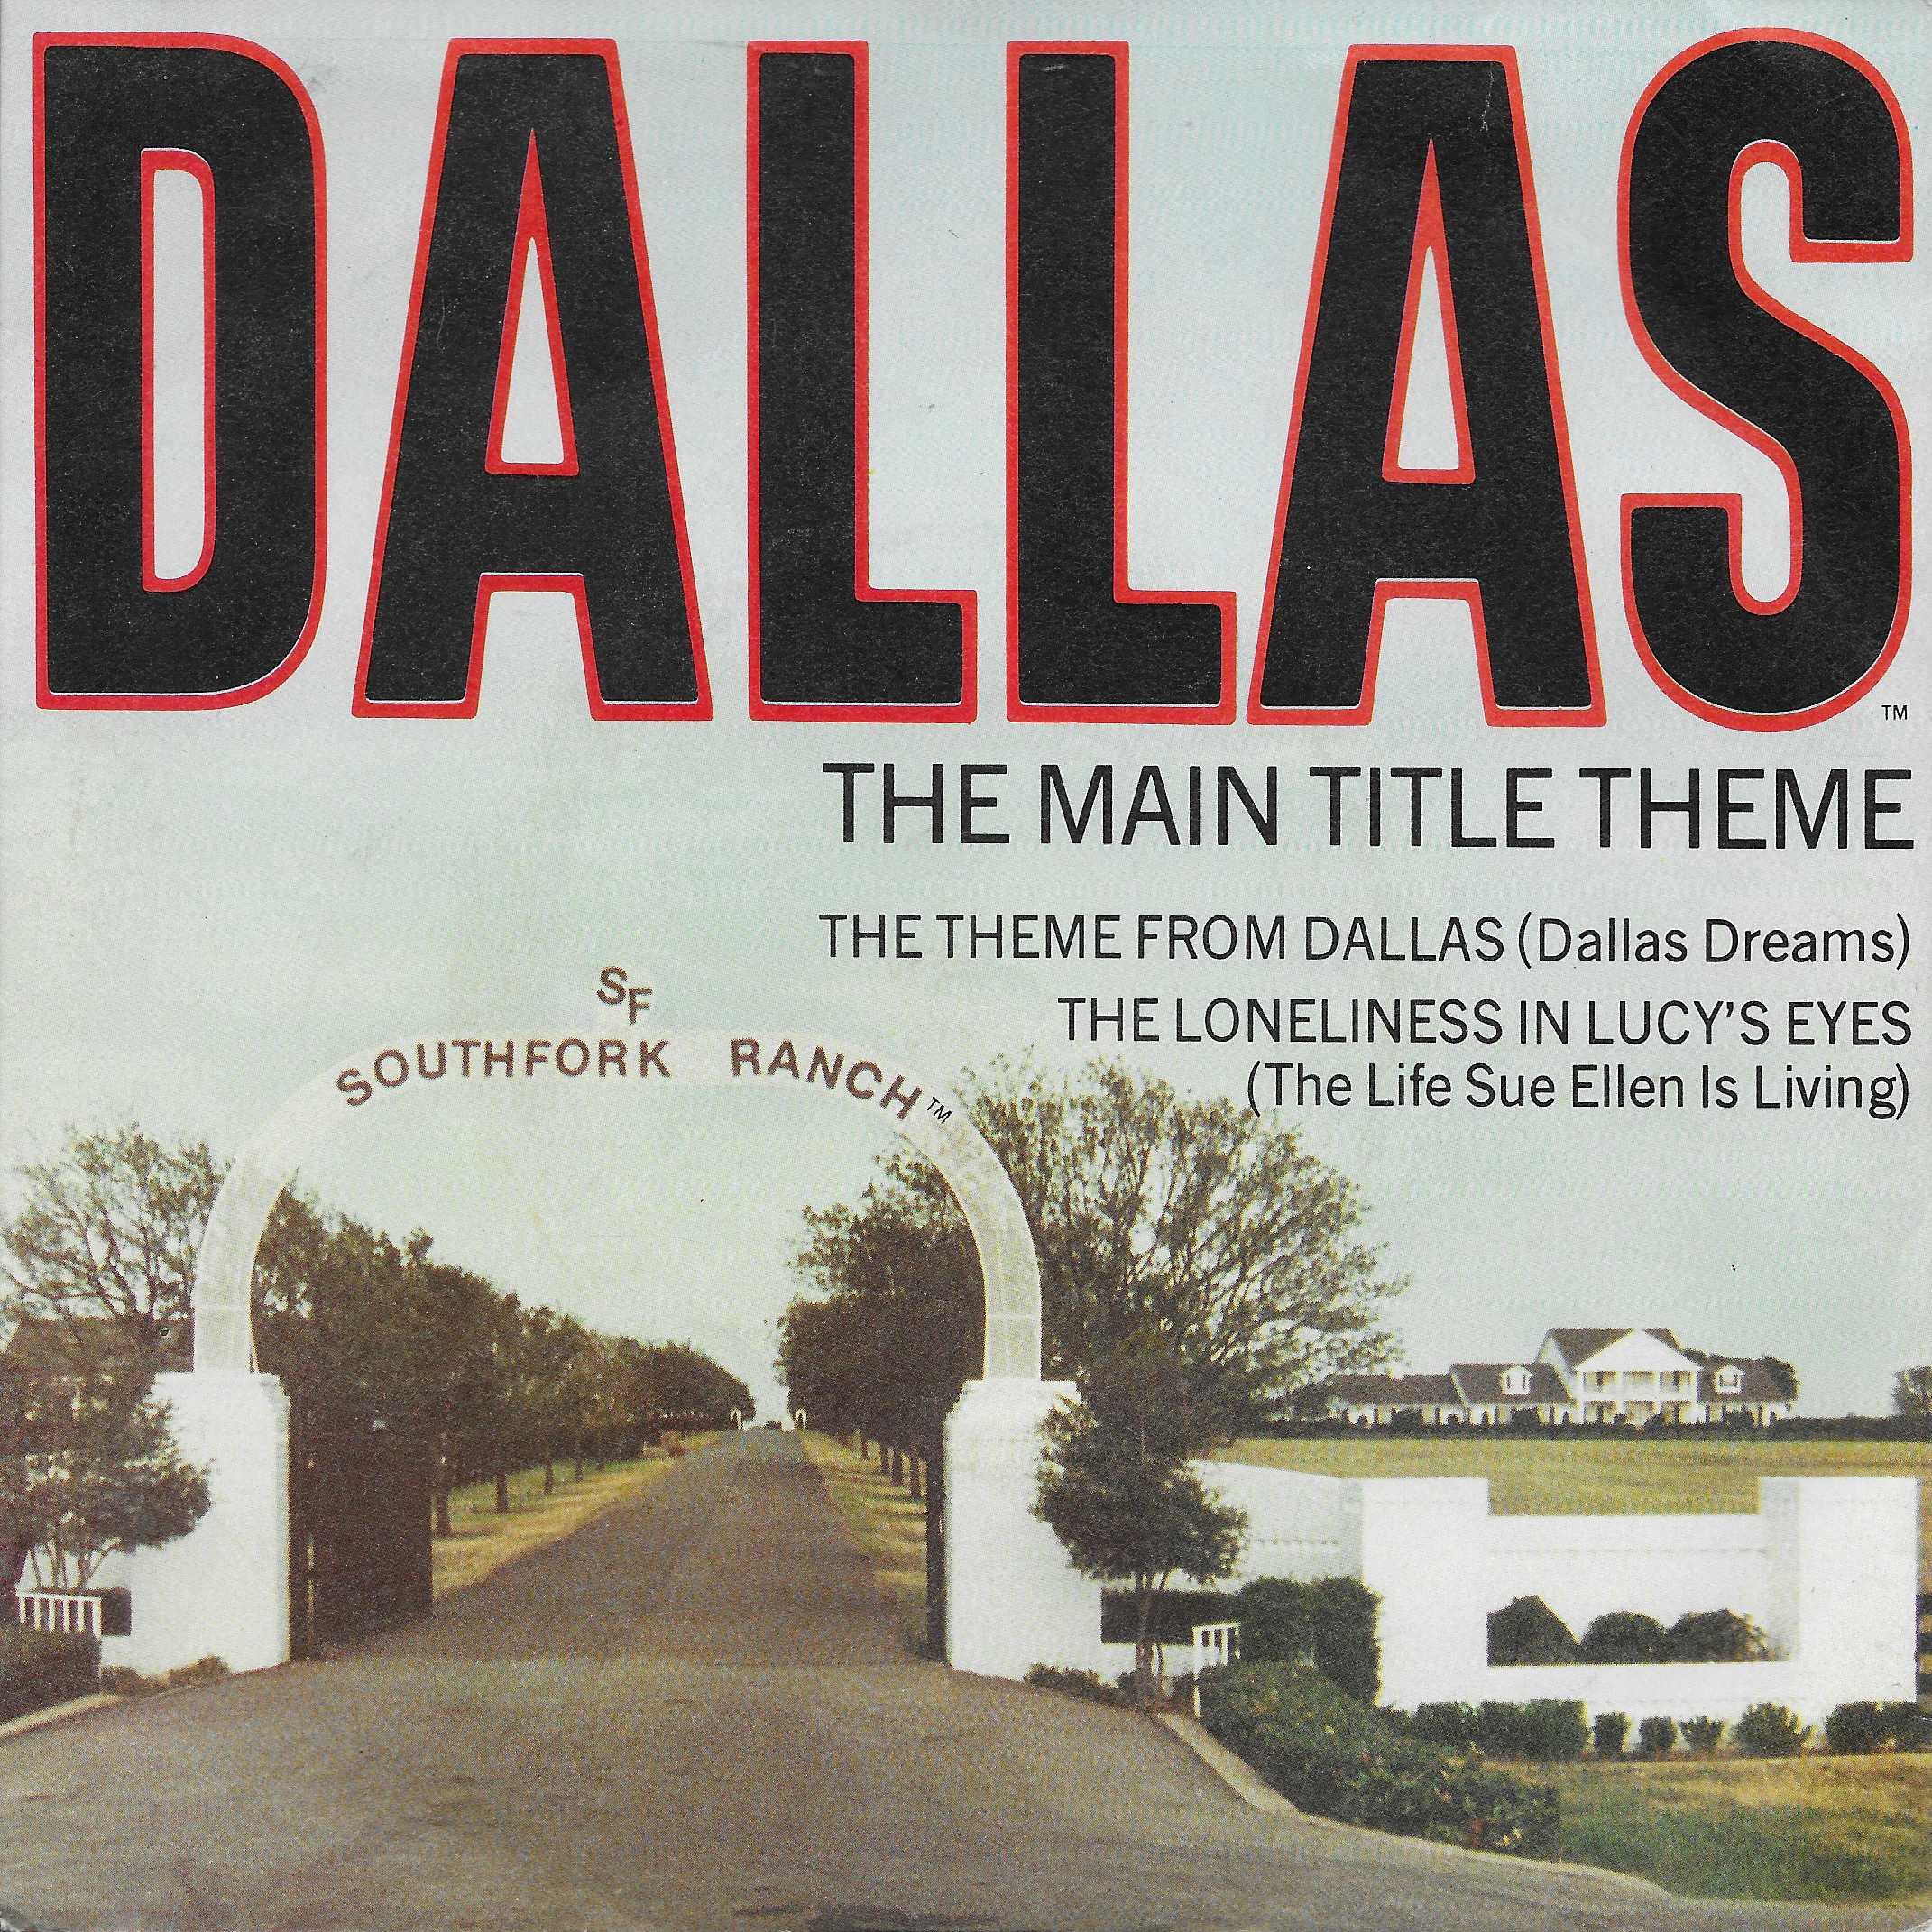 Picture of W 8817 Dallas dreams (Dallas) by artist Jerrold Immel from the BBC records and Tapes library